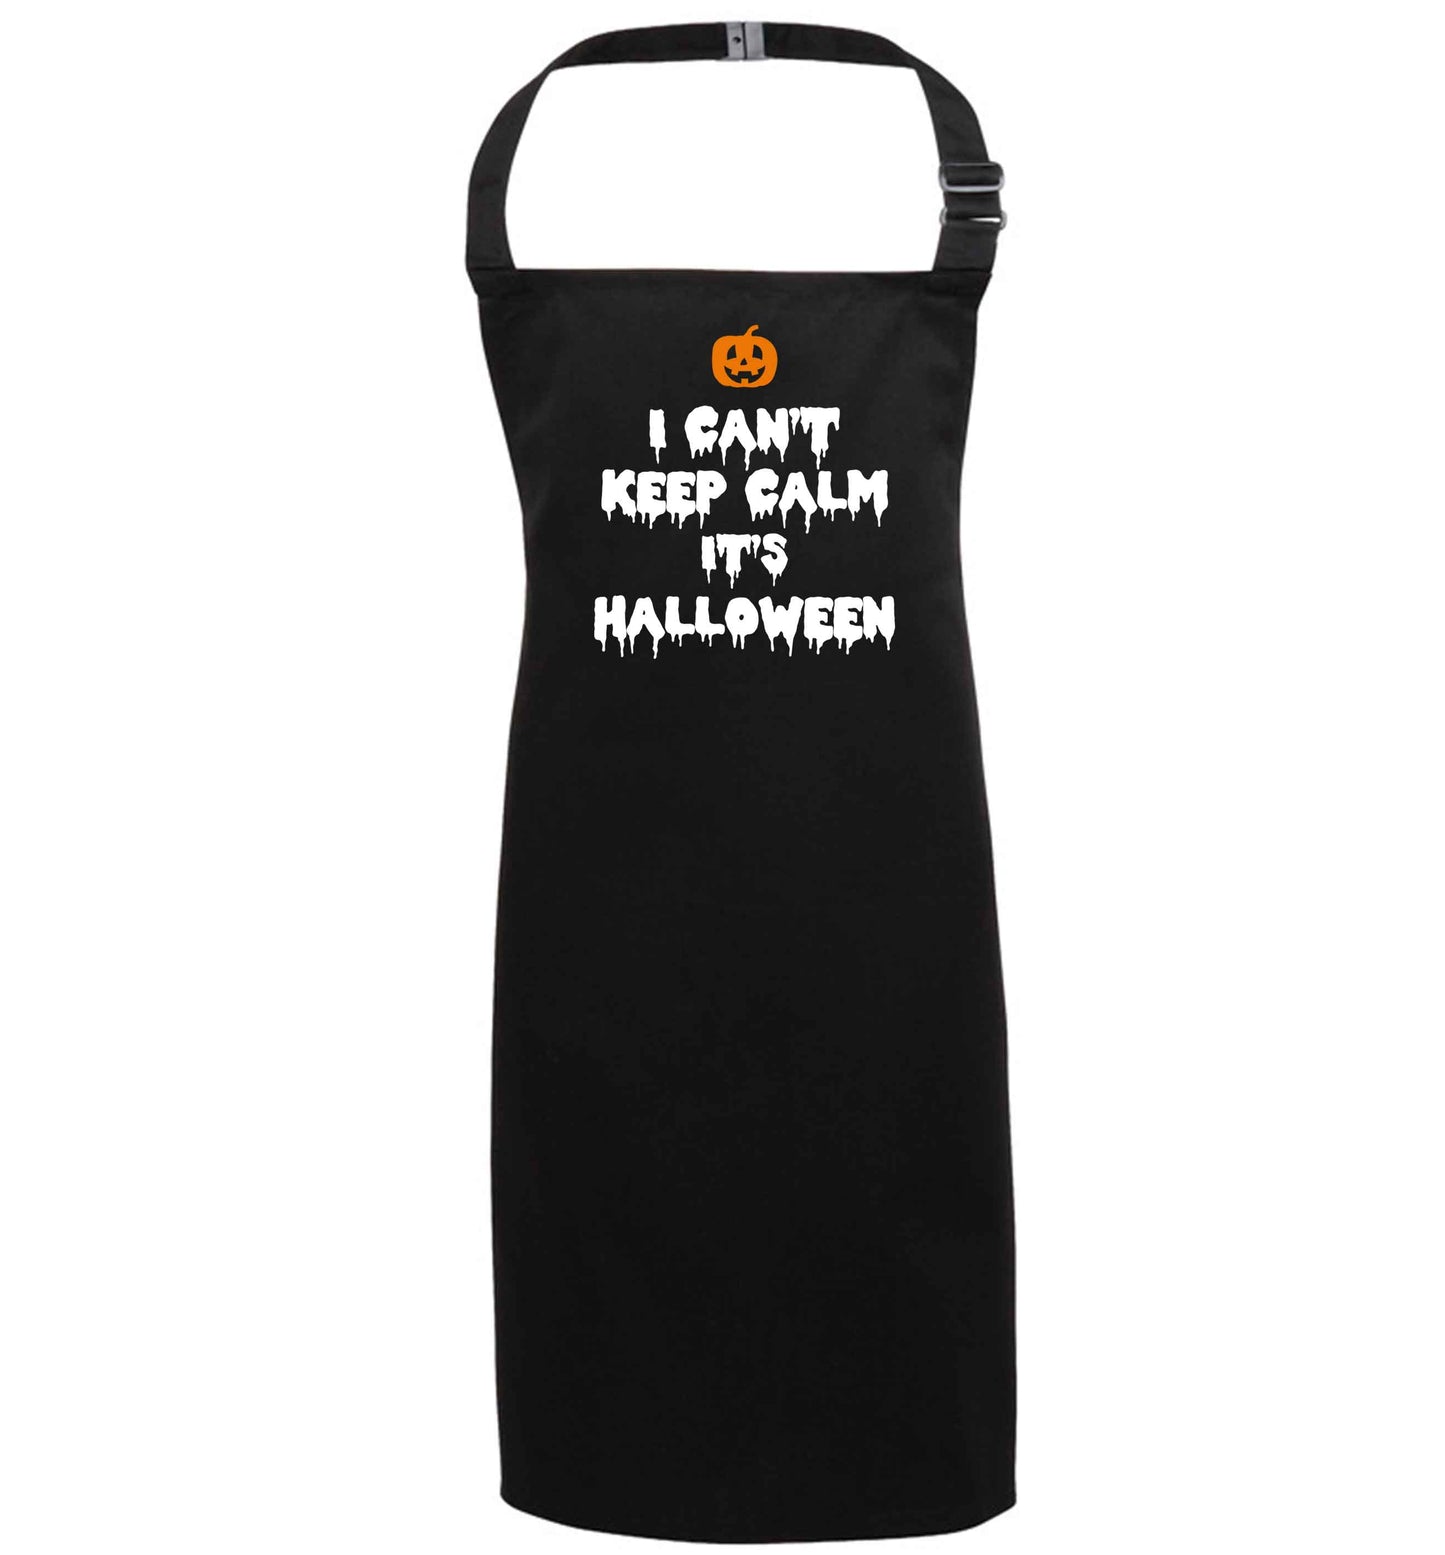 I can't keep calm it's halloween black apron 7-10 years